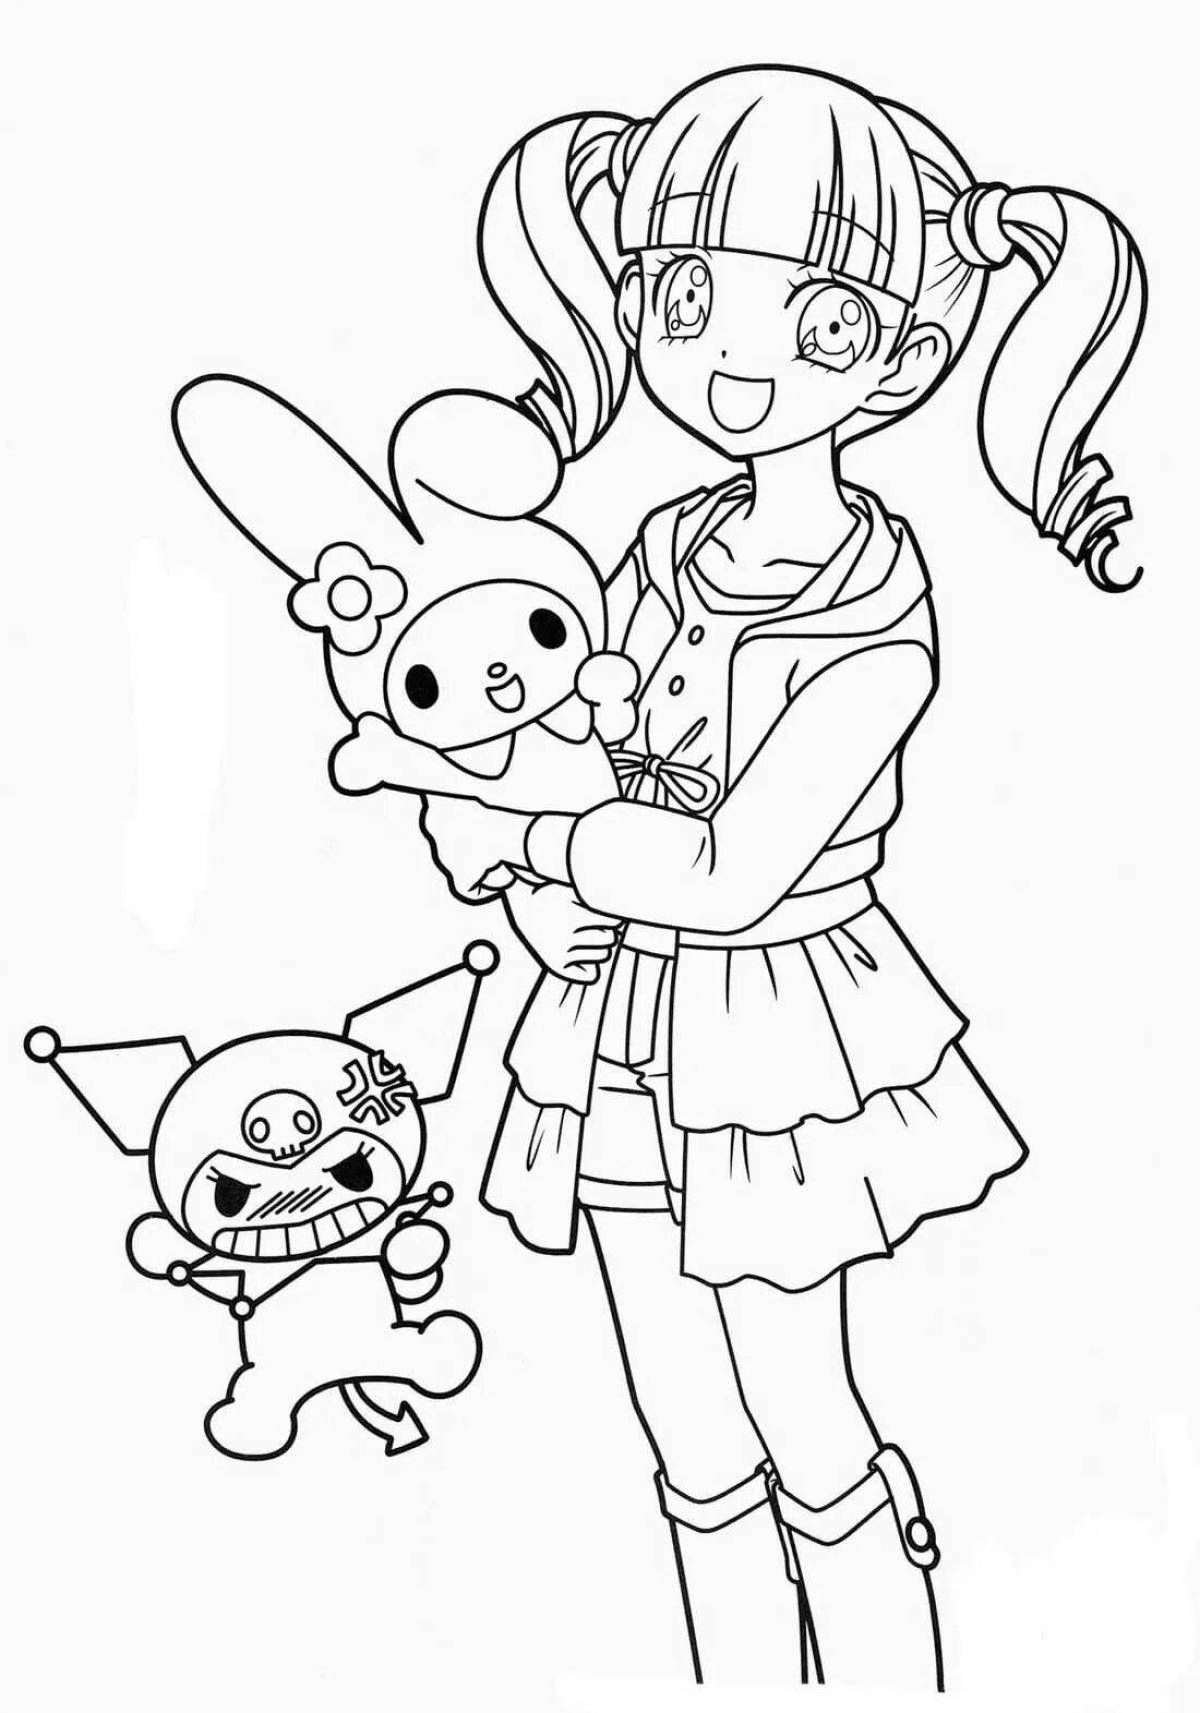 Coloring page my melody